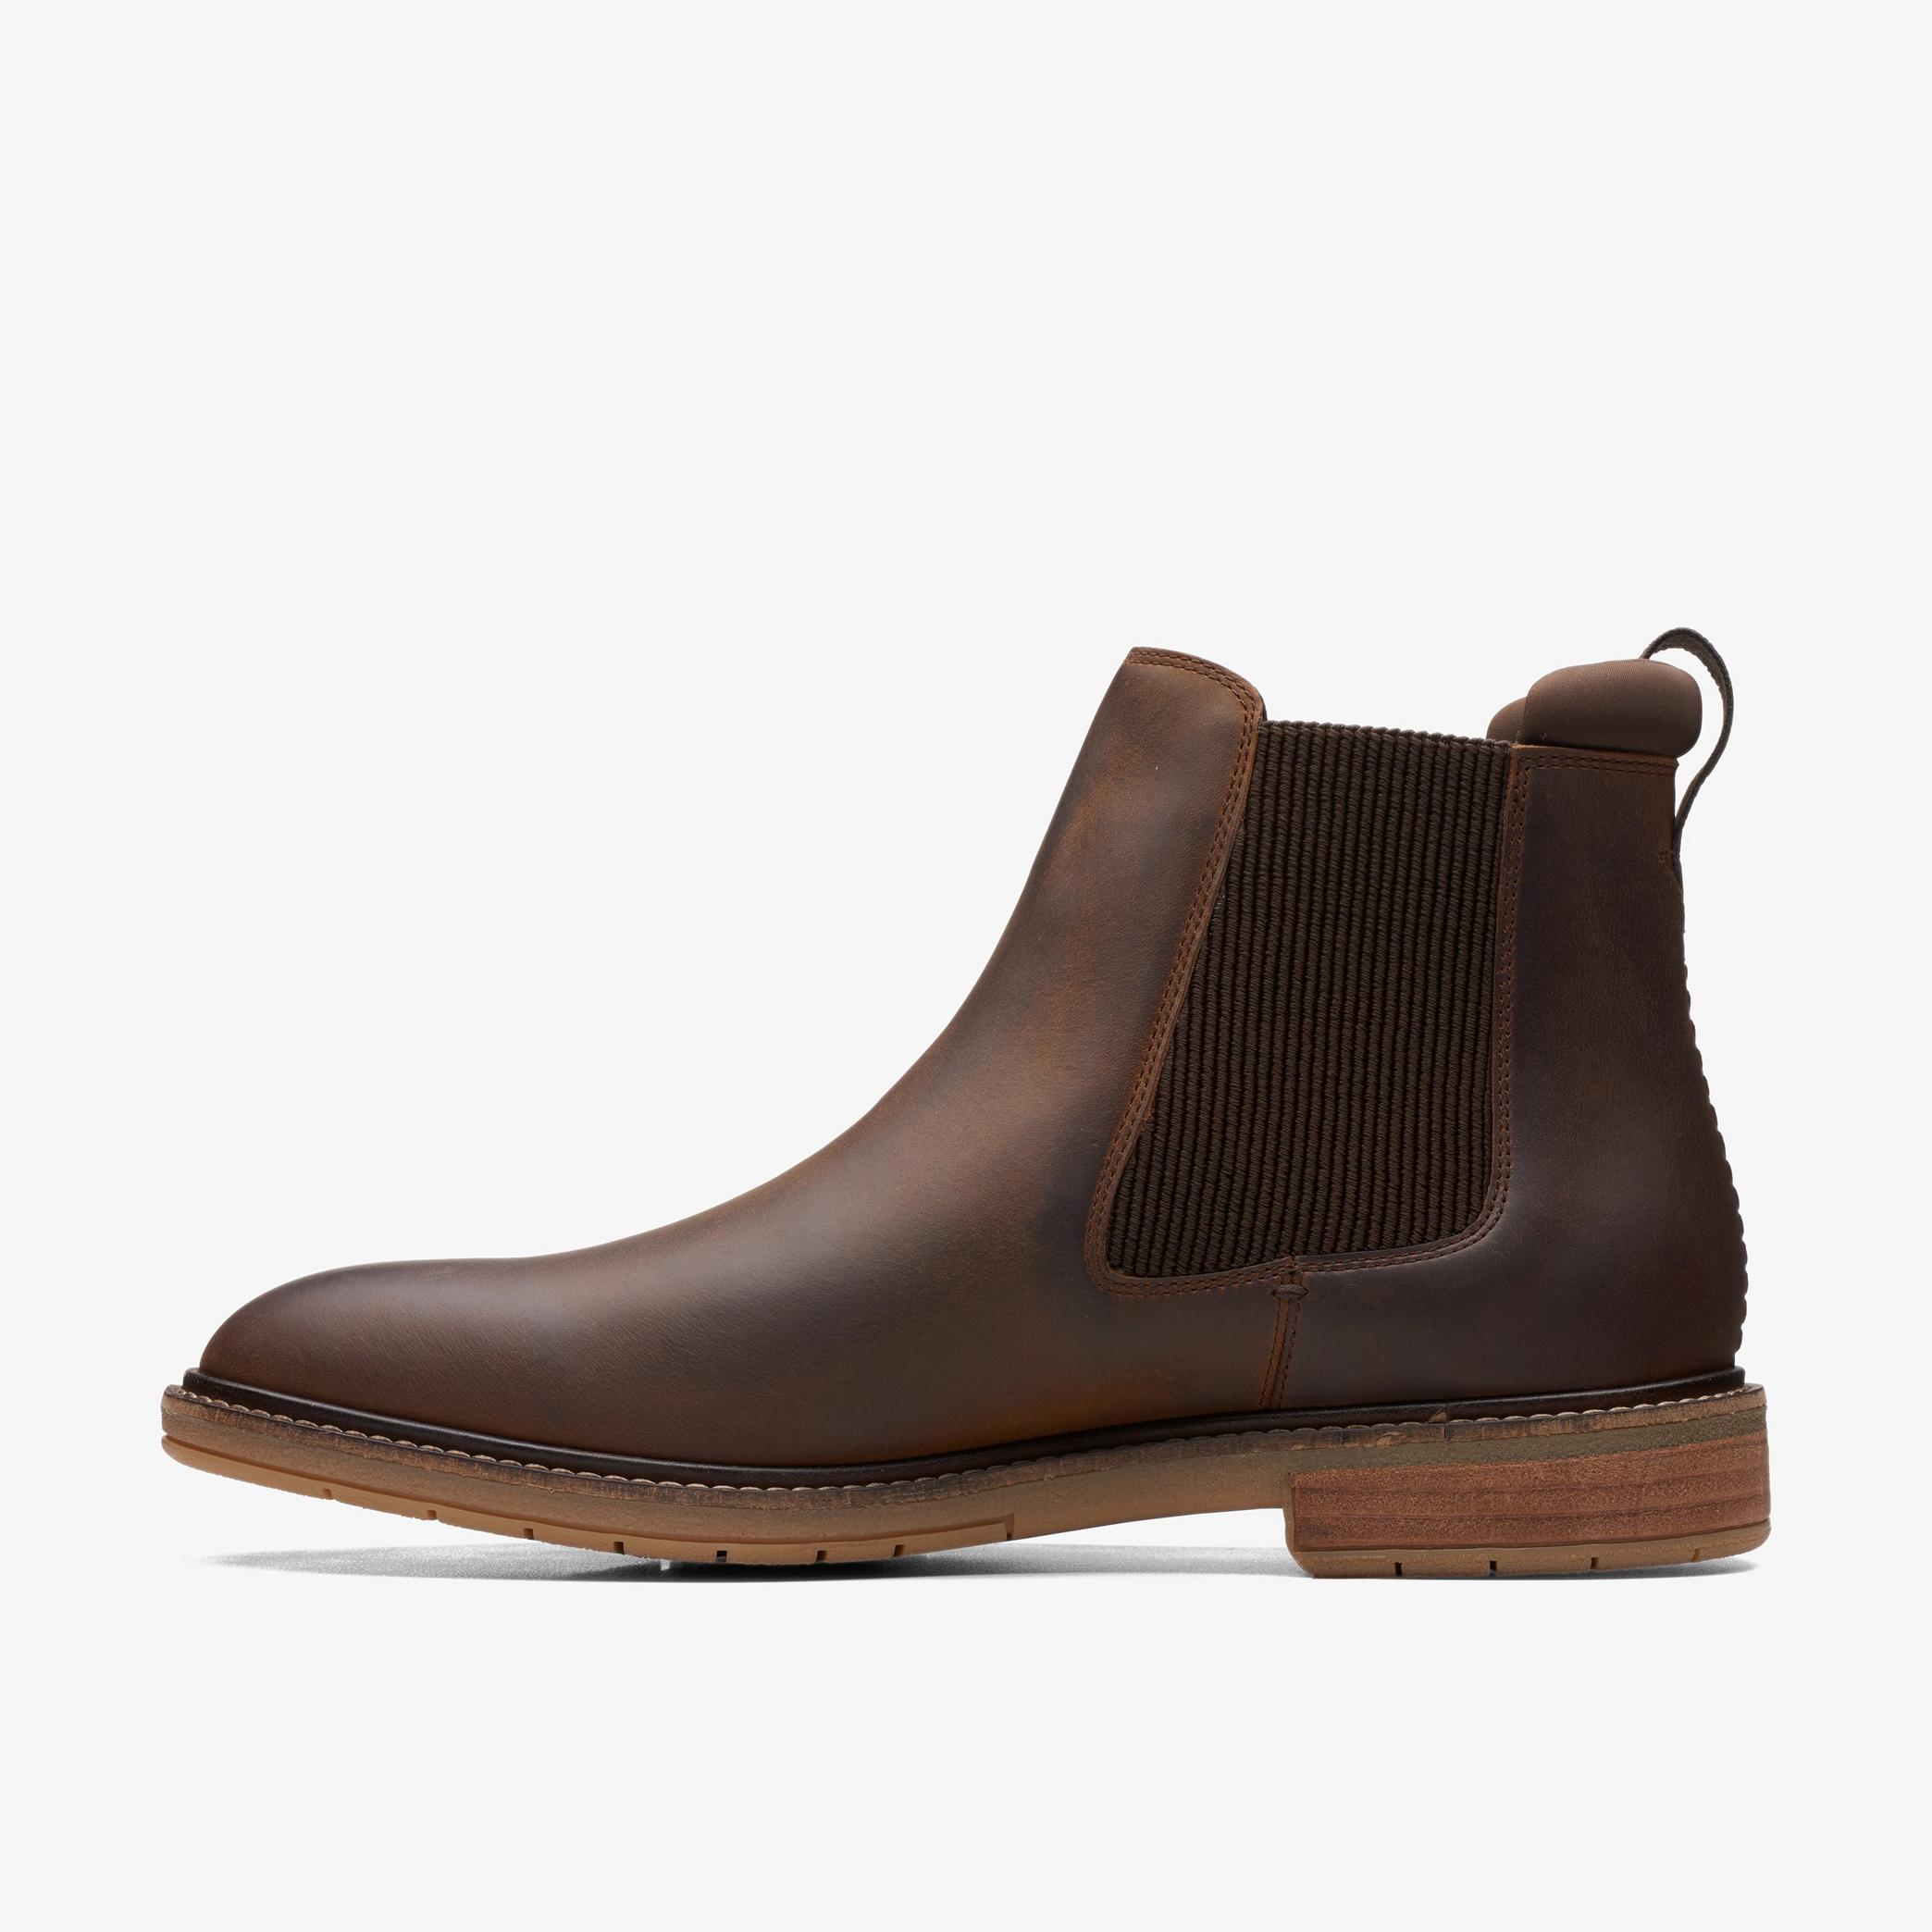 Clarkdale Hall Beeswax Leather Chelsea Boots, view 2 of 6